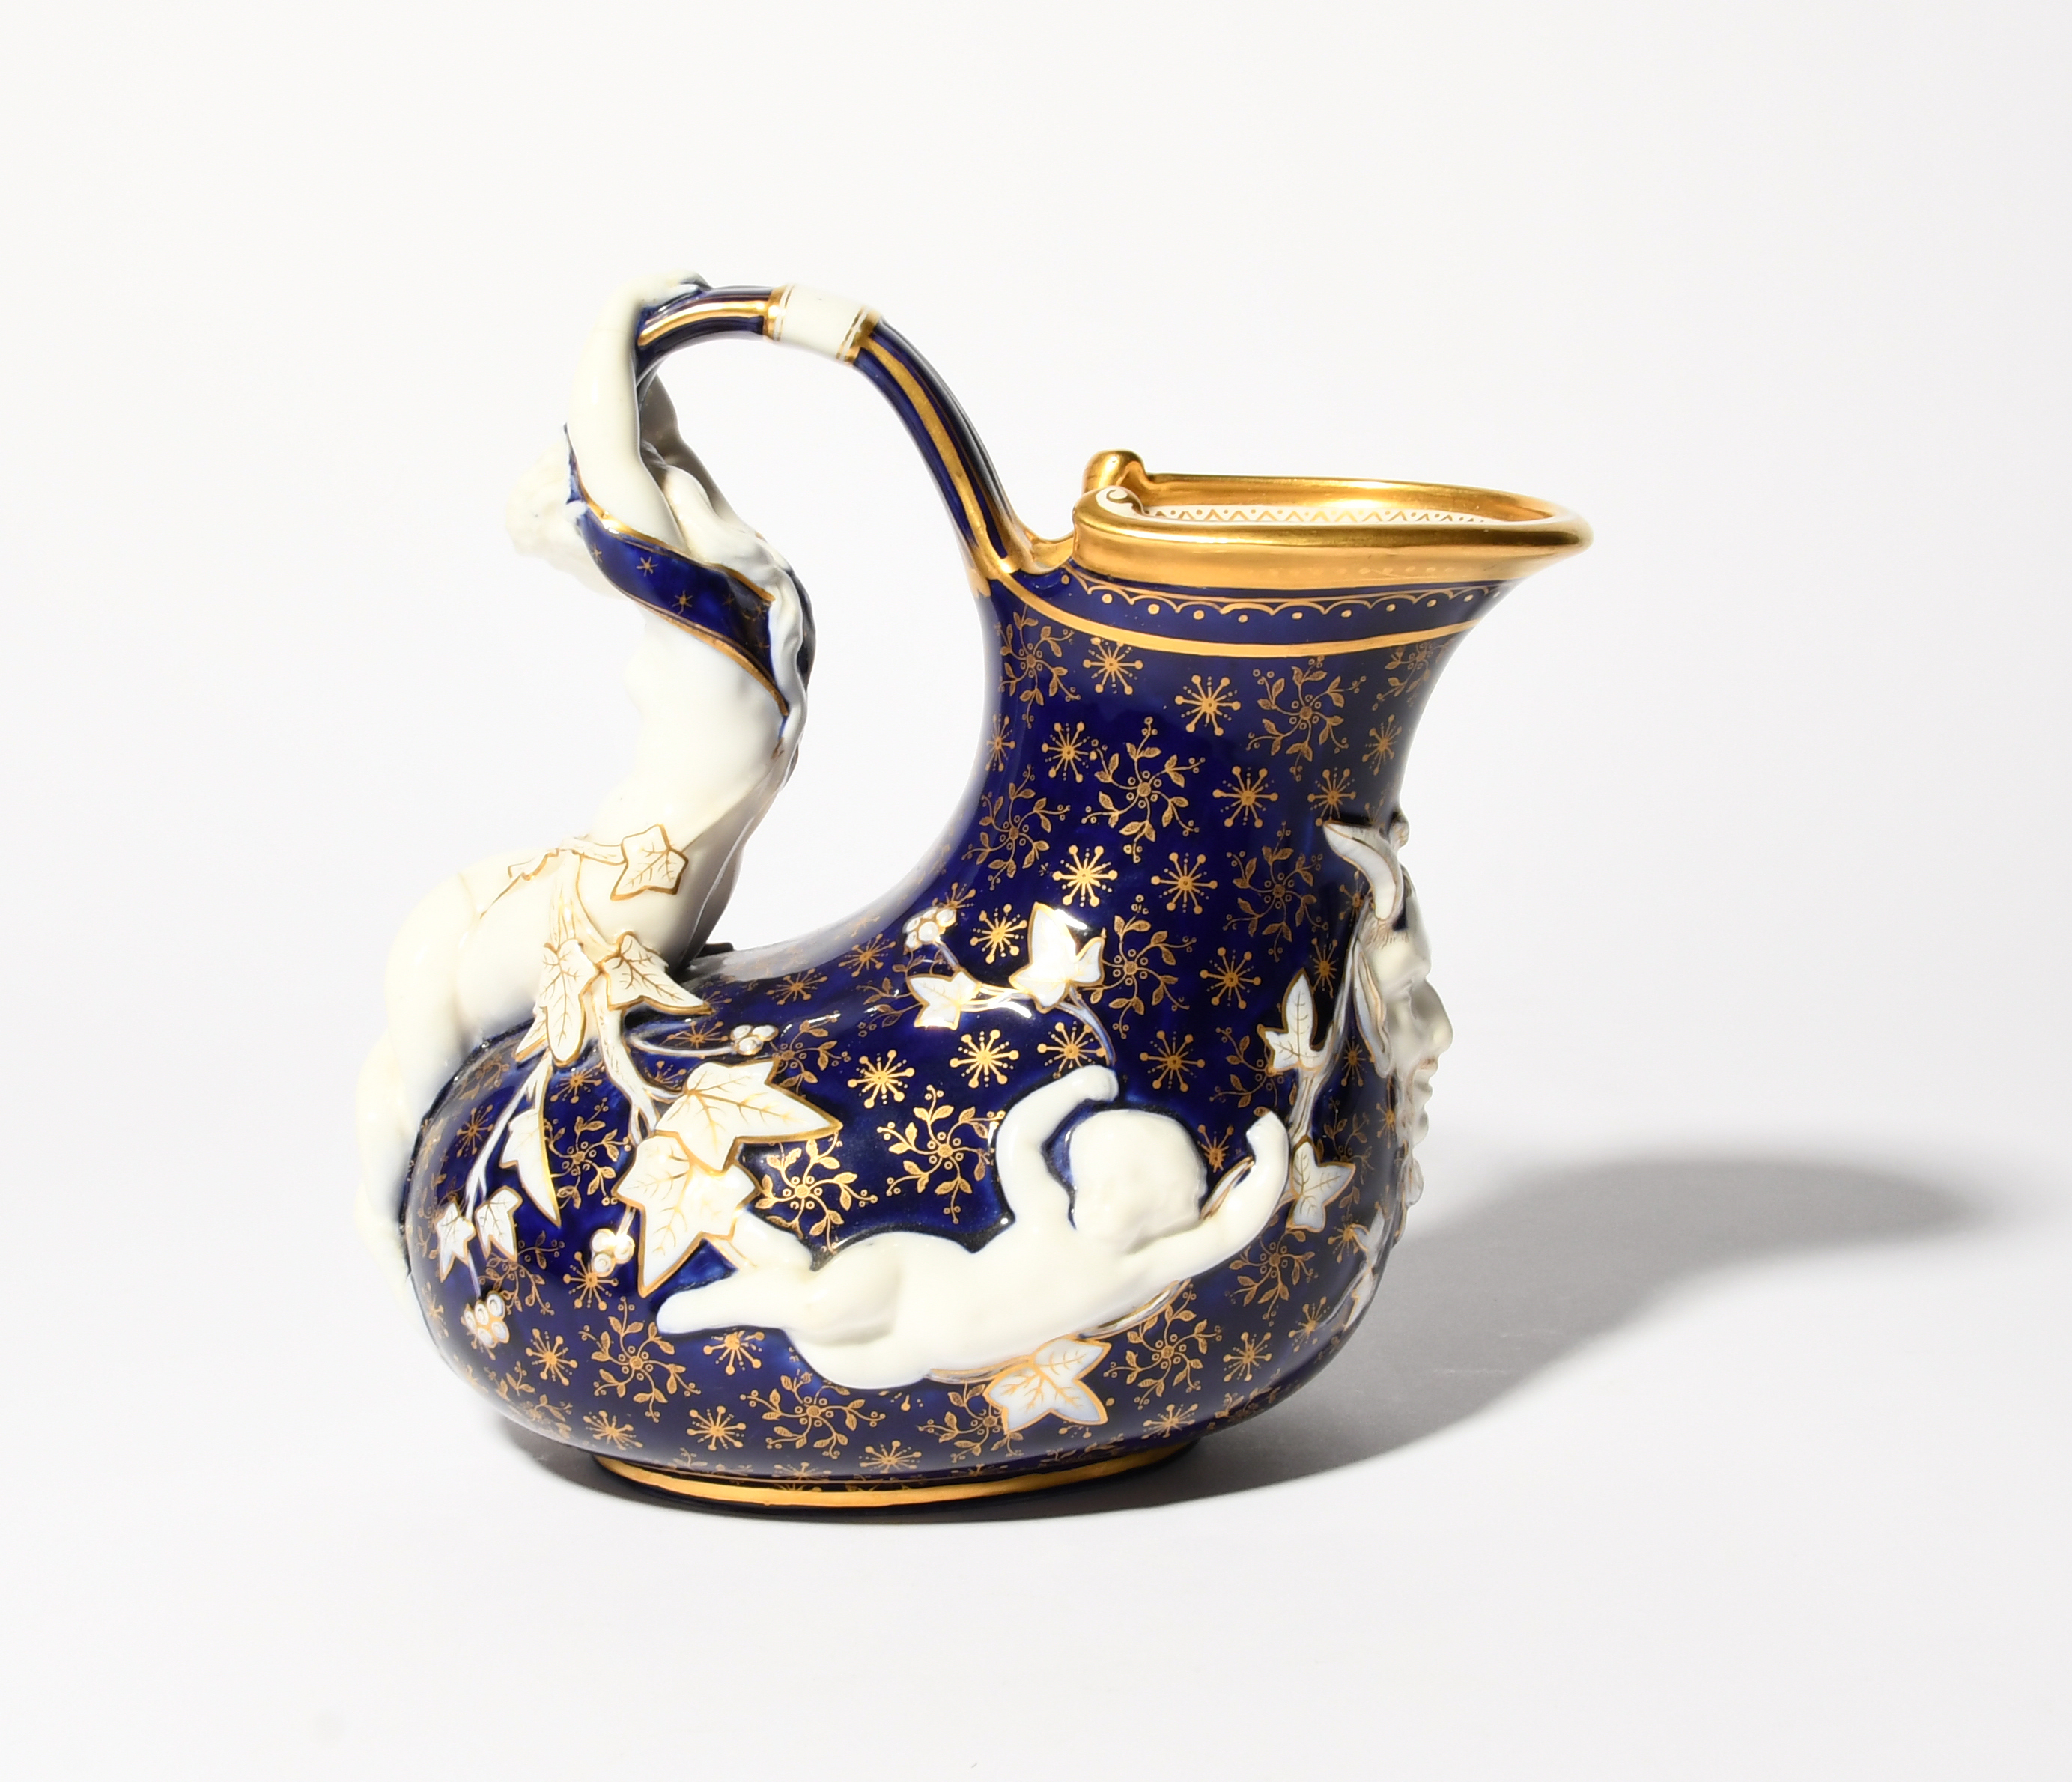 A rare Minton porcelain 'Mermaid' ewer, c.1880, of askos shape, moulded with putti and a horned - Image 5 of 5